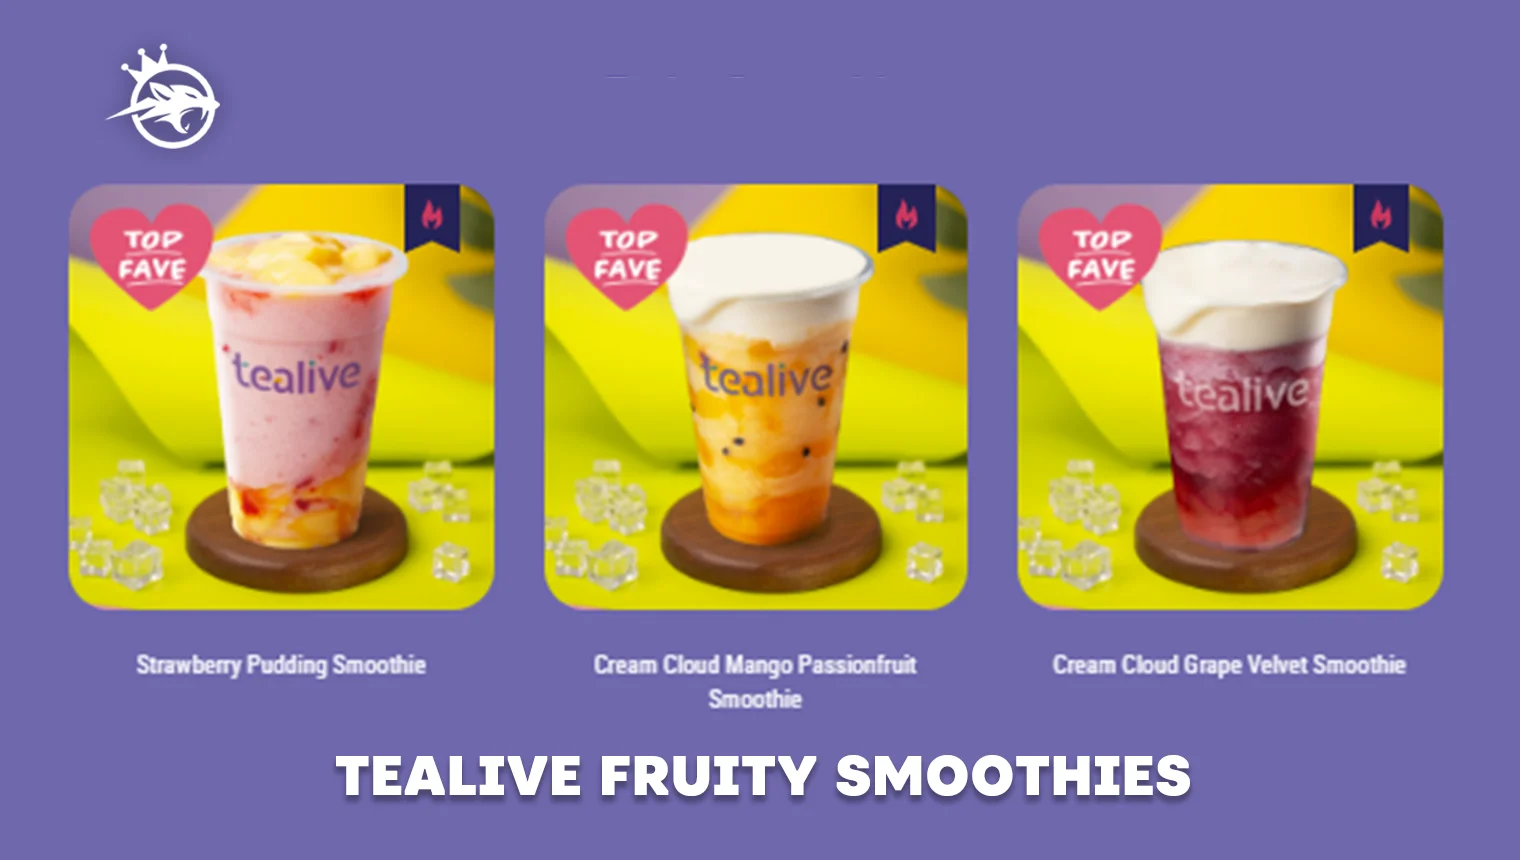 Tealive Fruity Smoothies